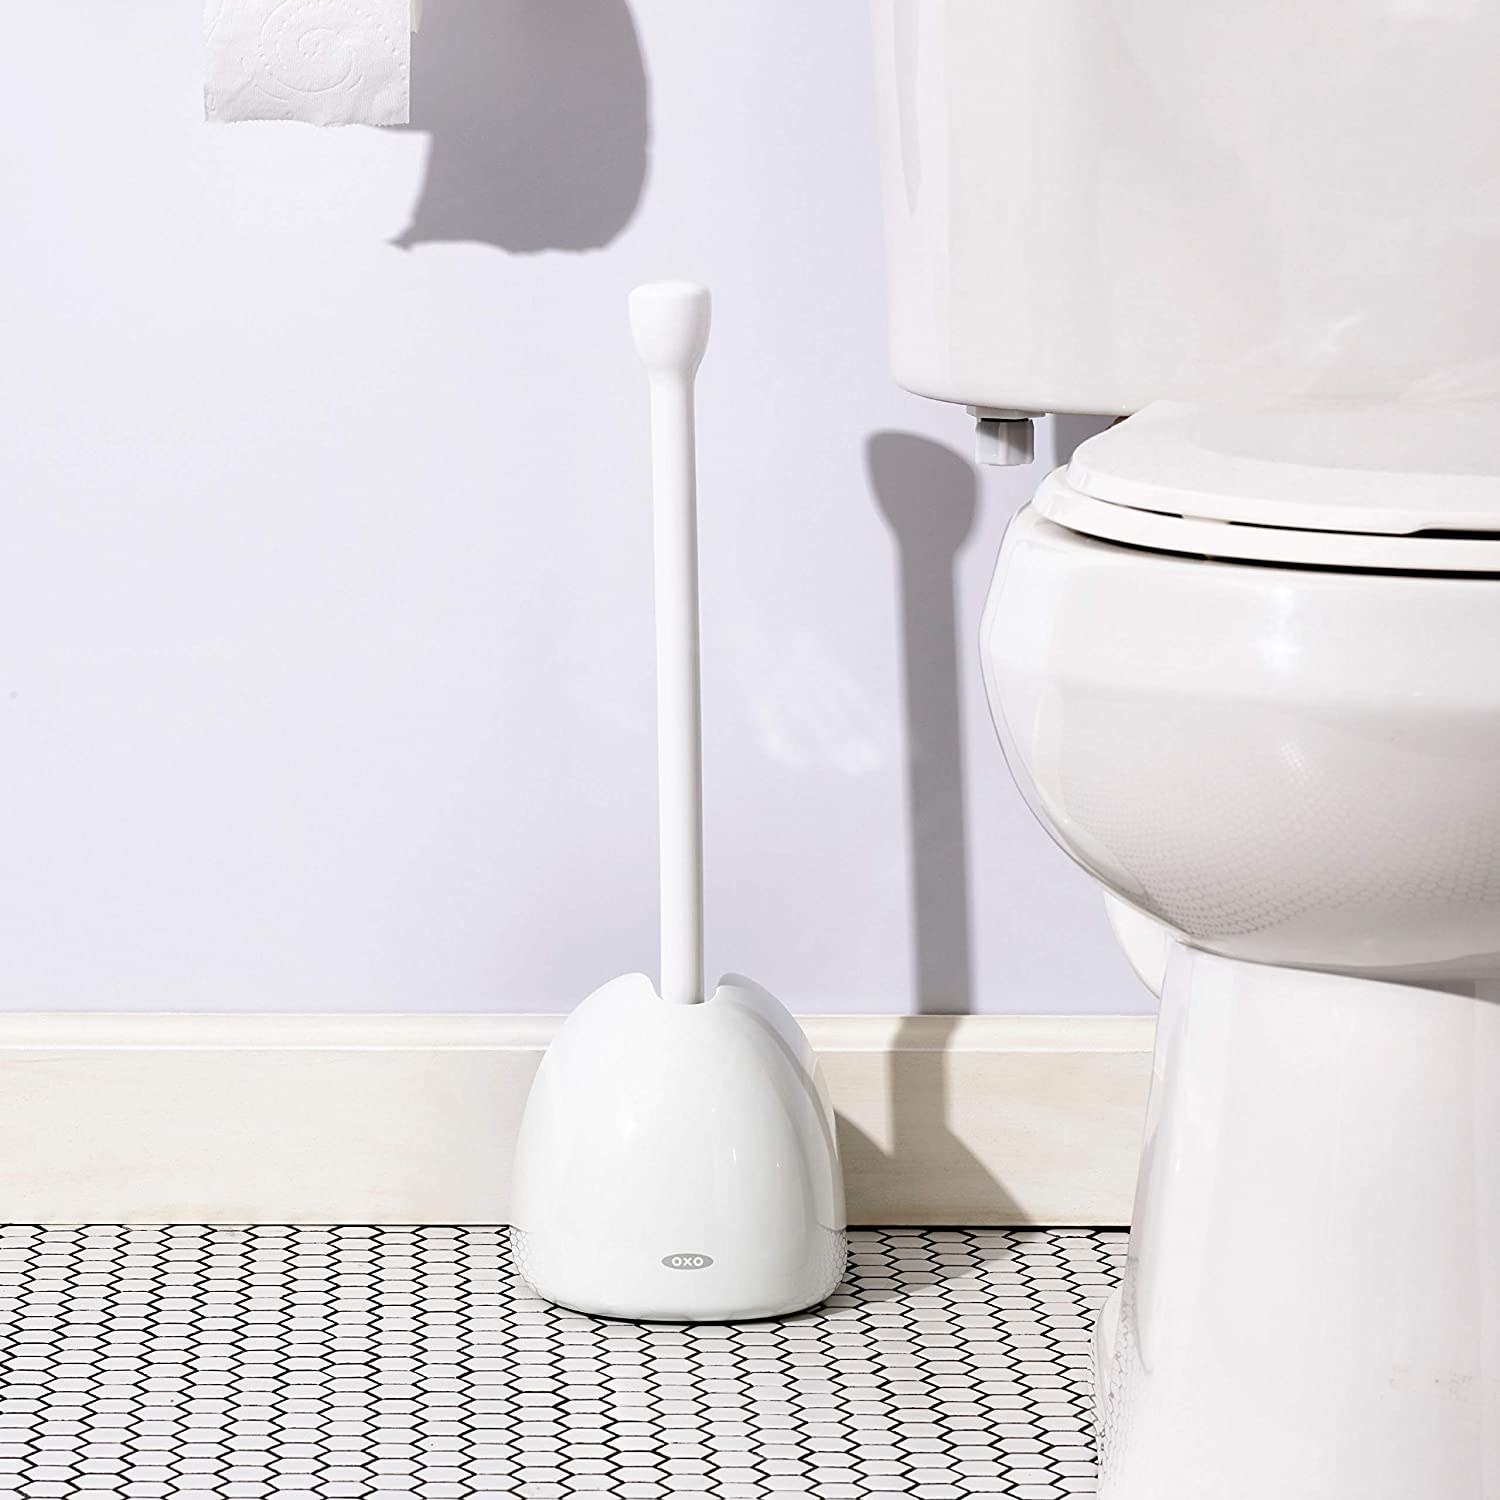 The white OXO Good Grips Toilet Plunger with Cover next to a toilet